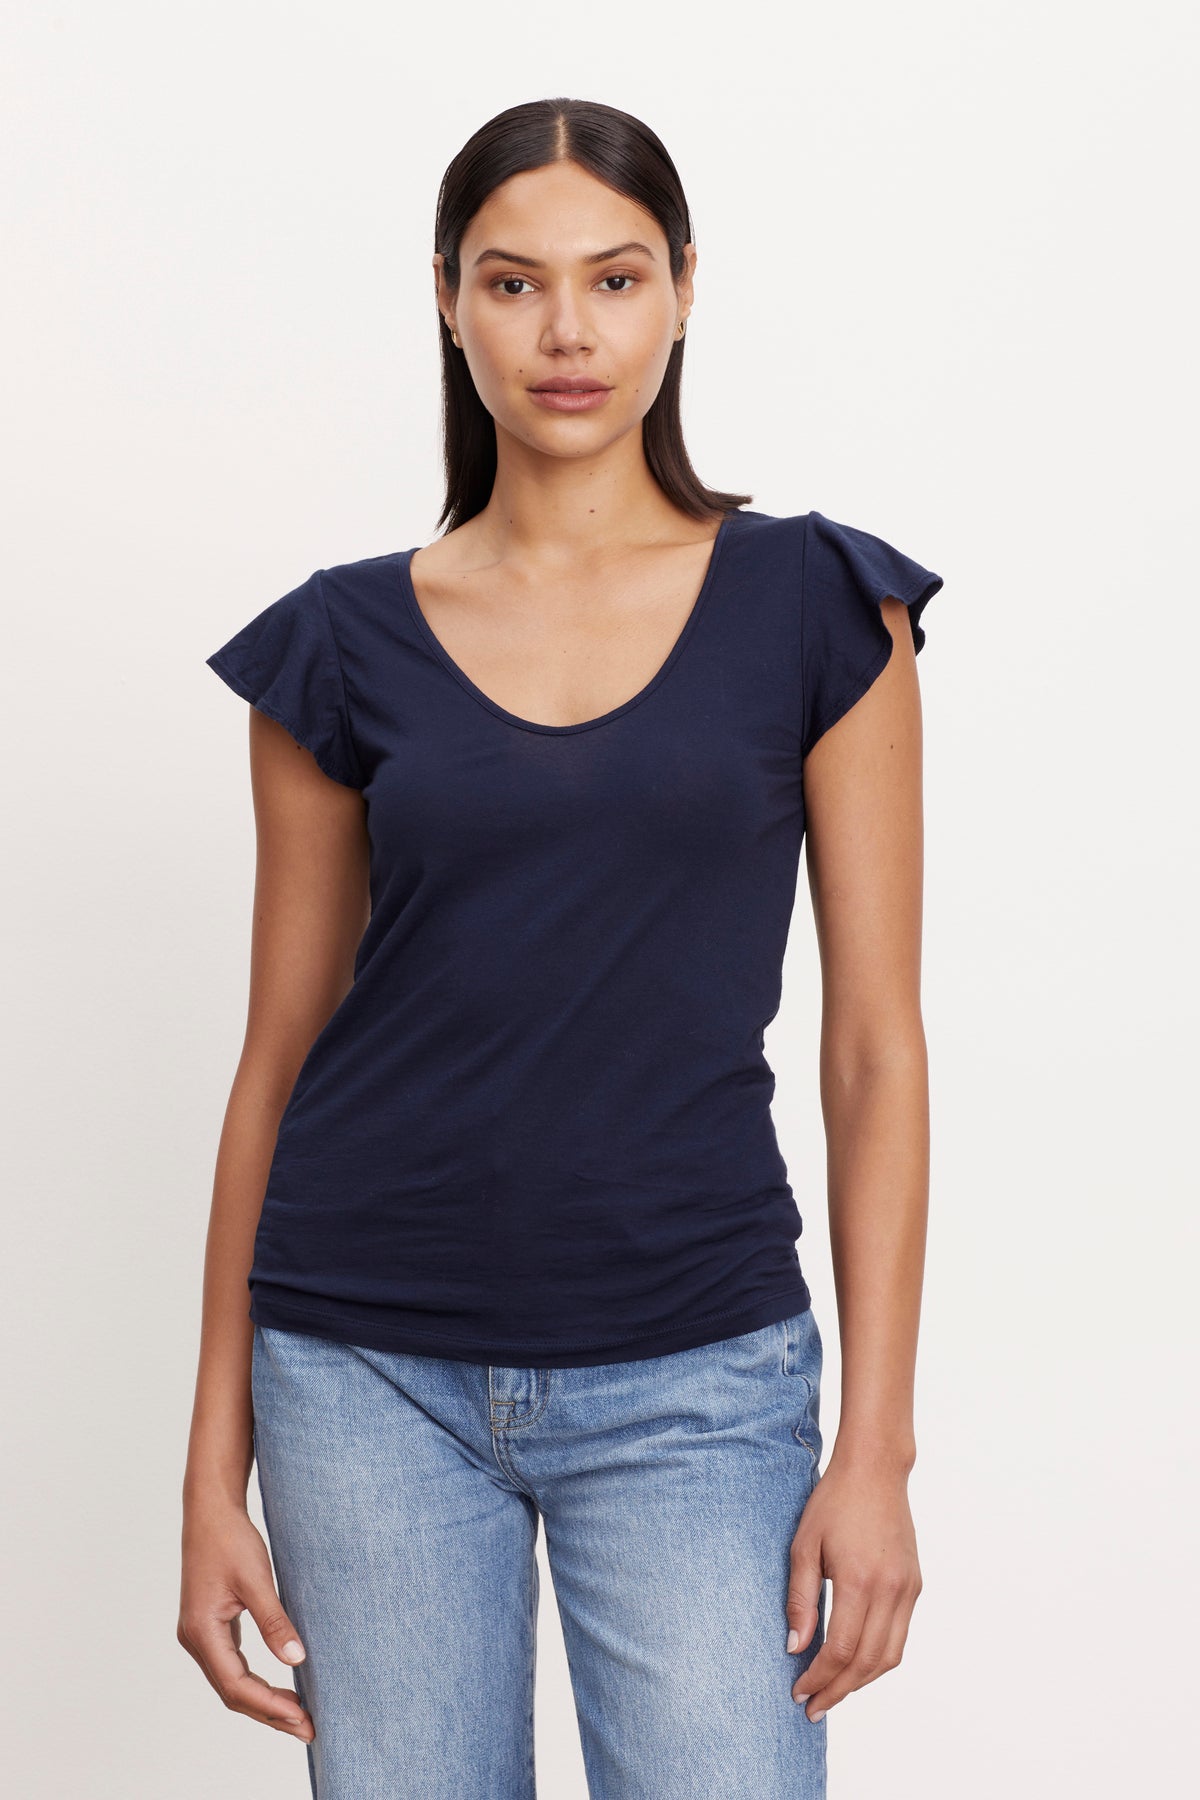 a woman wearing jeans and a Velvet by Graham & Spencer RASHIDA SCOOP NECK TEE.-26484807631041